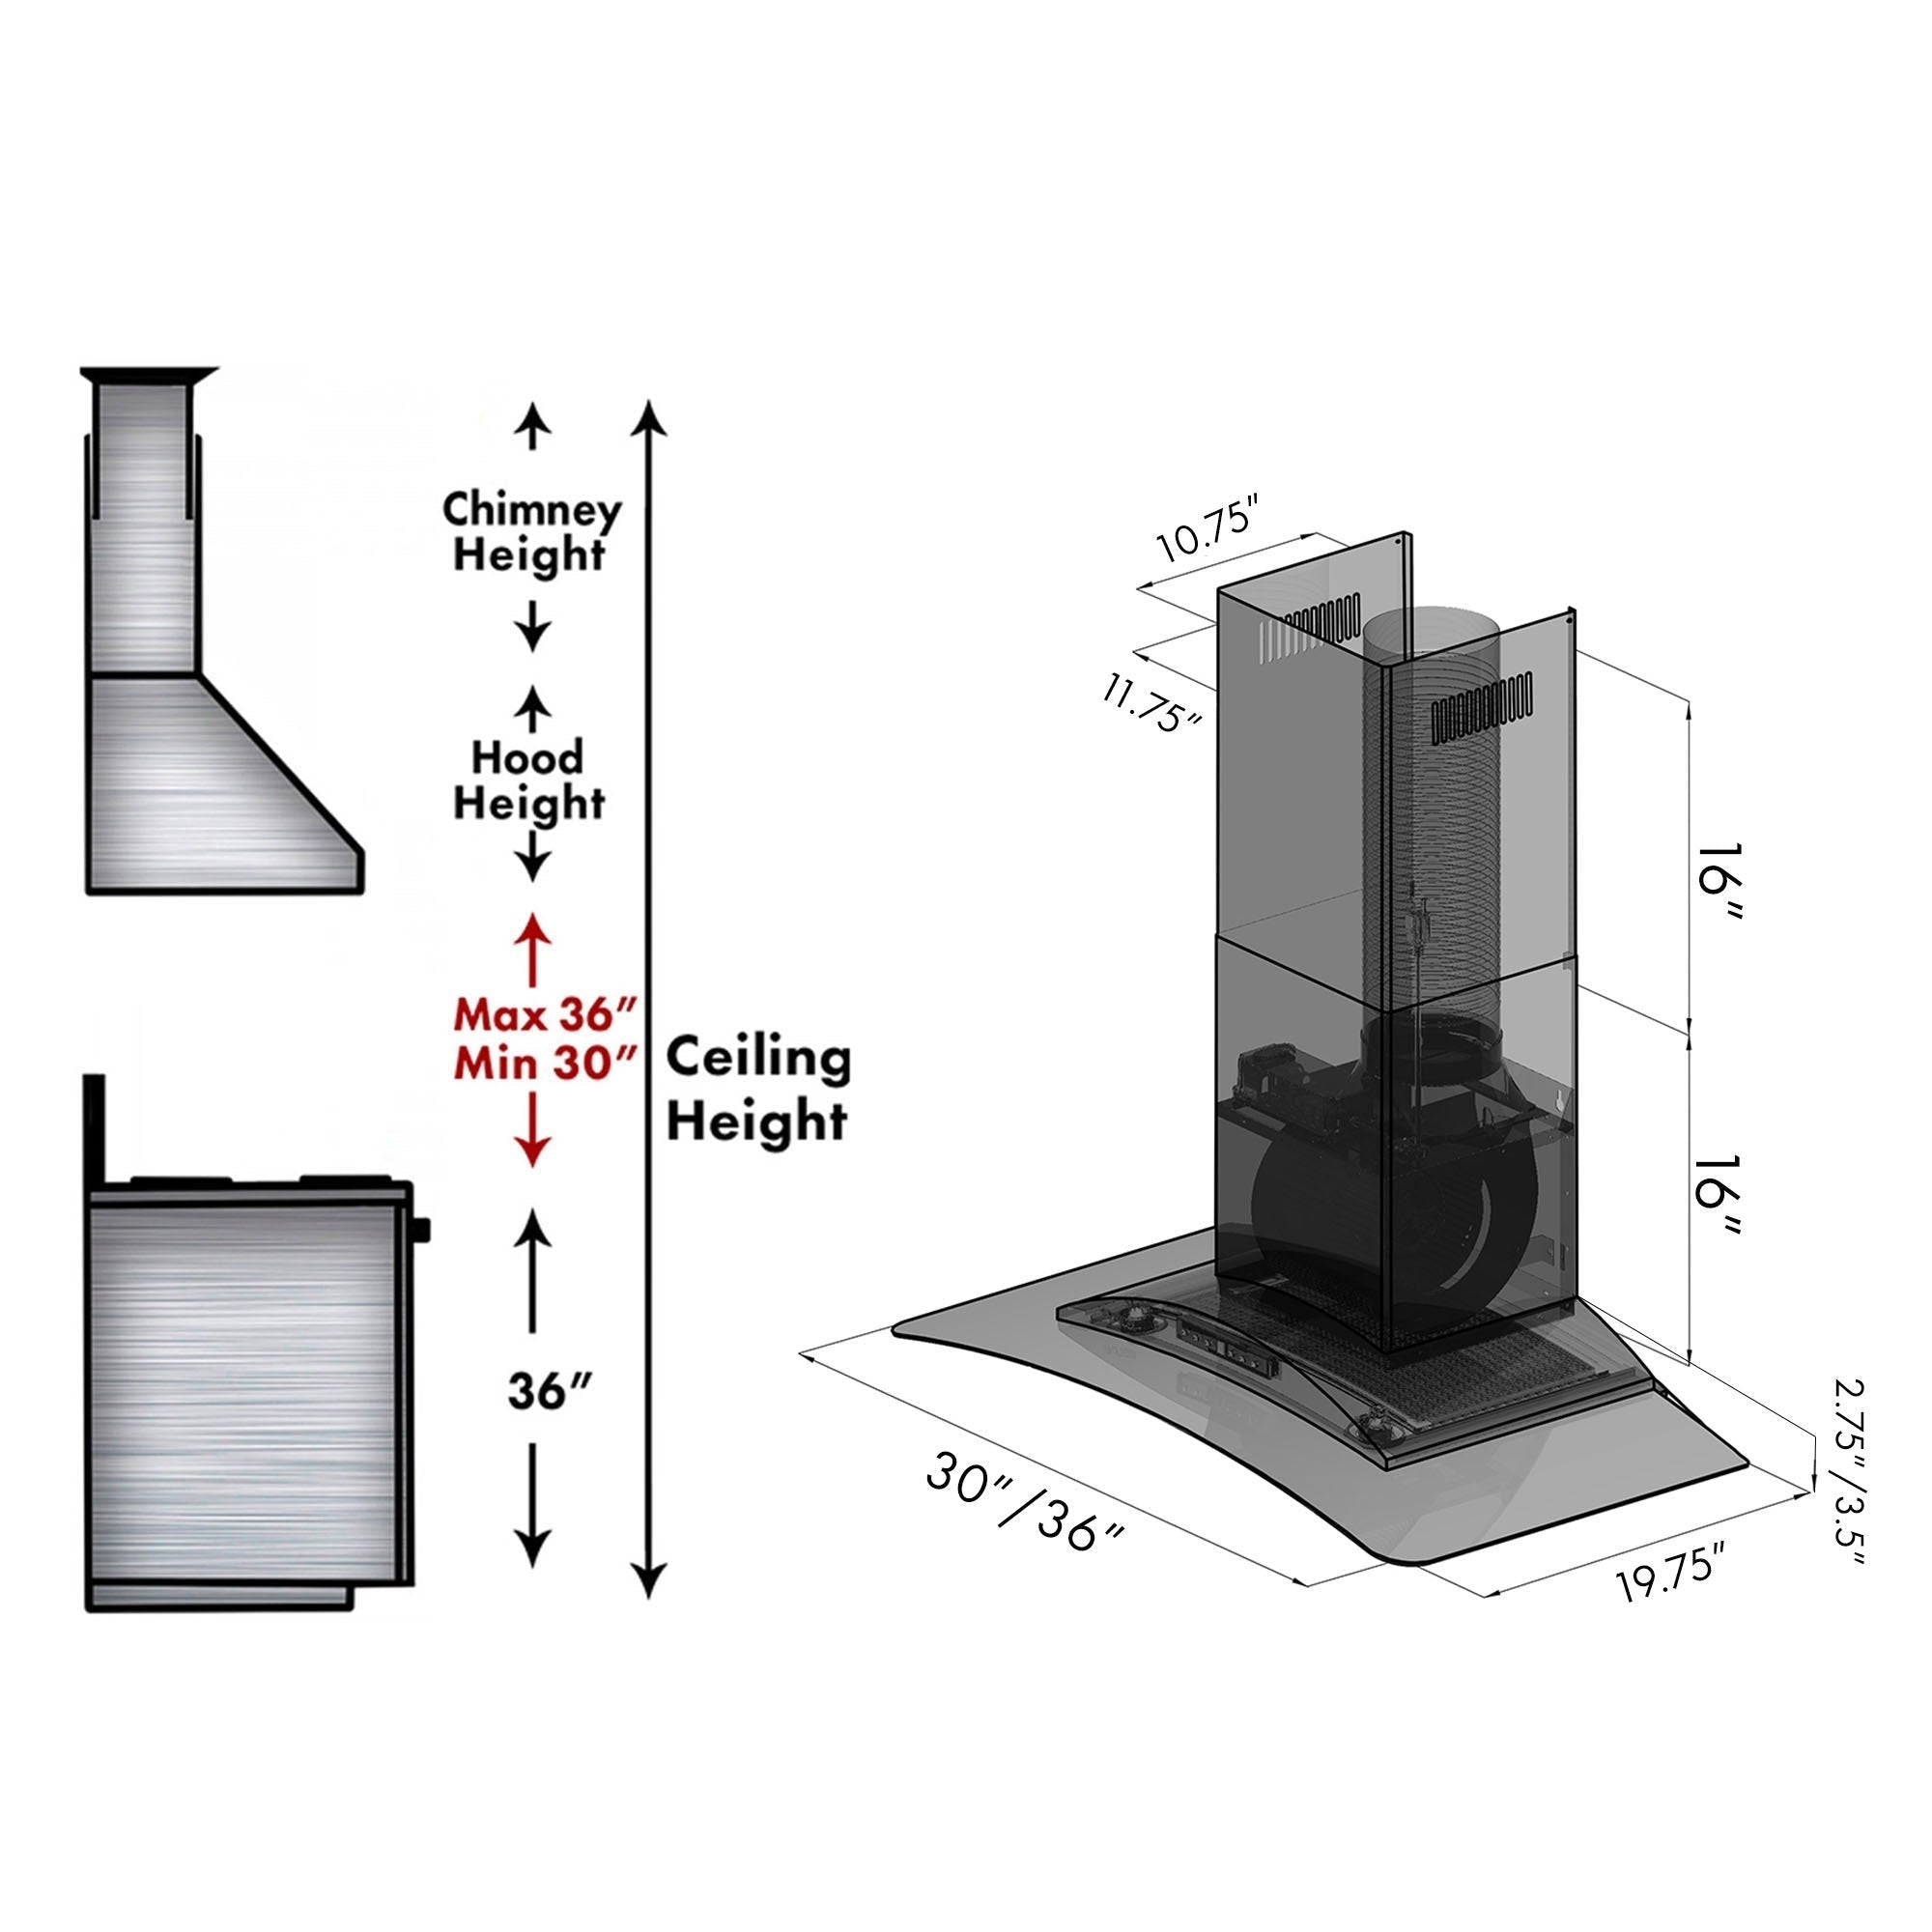 ZLINE Convertible Vent Wall Mount Range Hood in Stainless Steel & Glass (KZ) chimney height guide and dimensions.